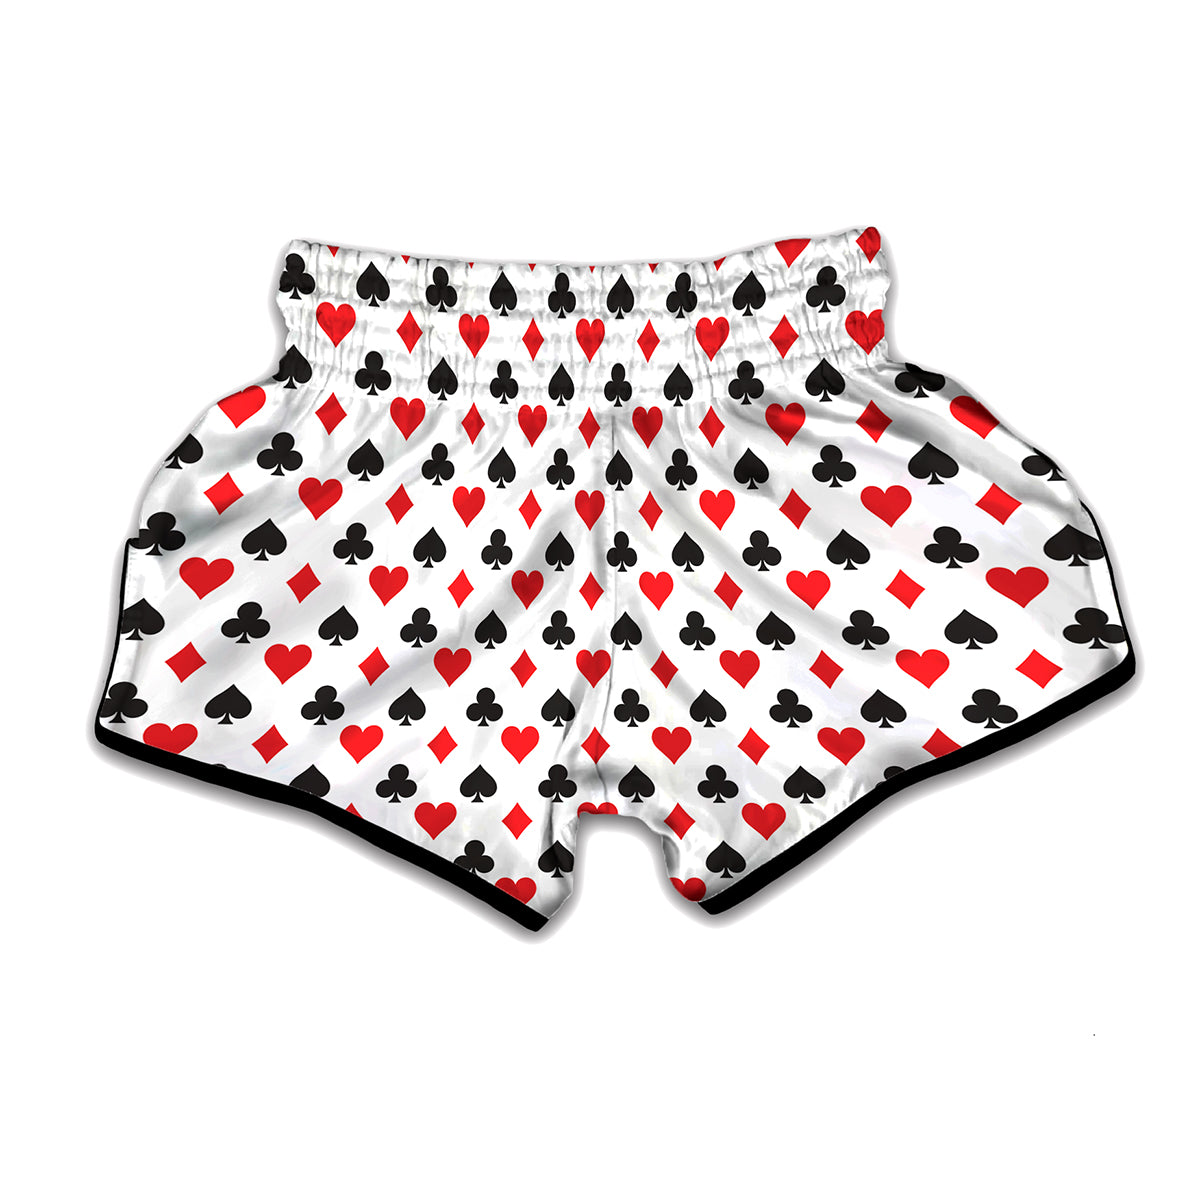 Playing Card Suits Pattern Print Muay Thai Boxing Shorts